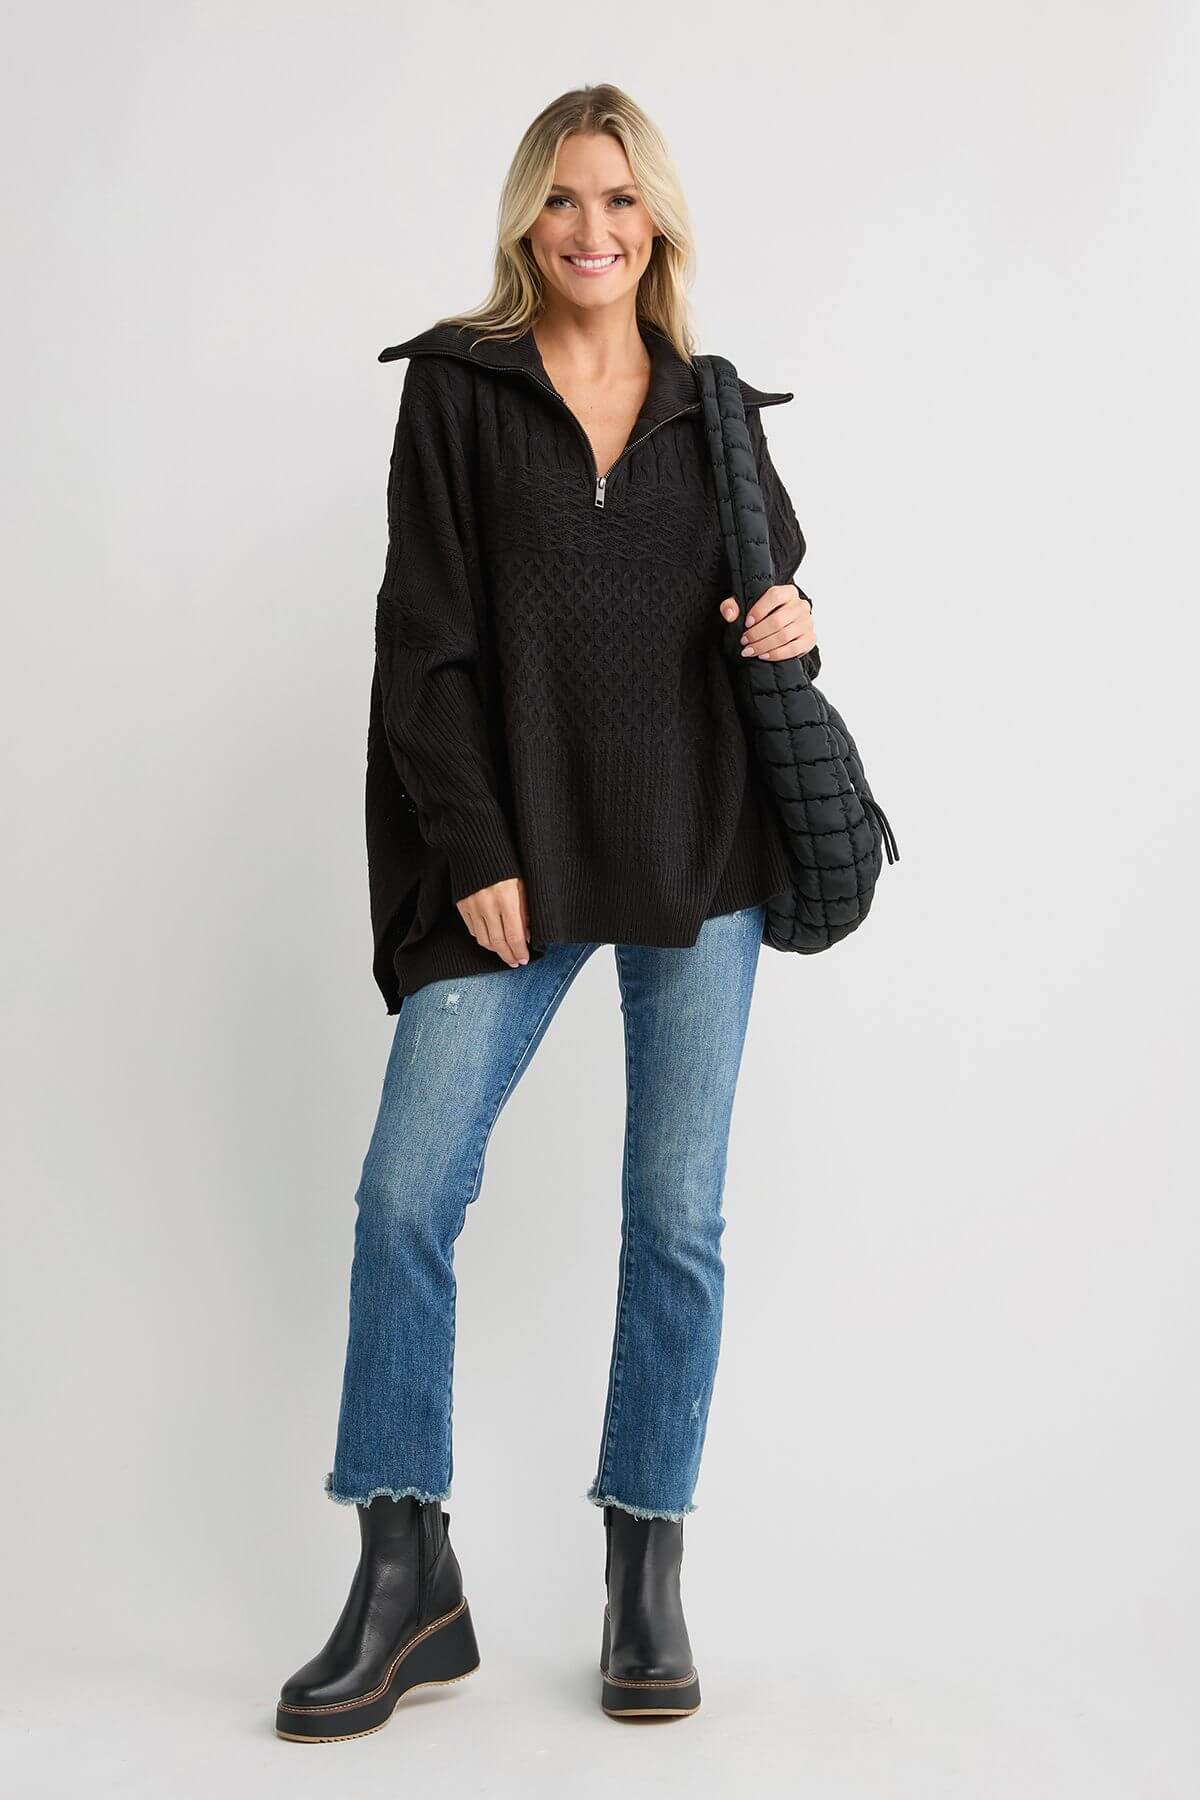 RD Style Persephone Long Sleeve Troyer Neck Poncho